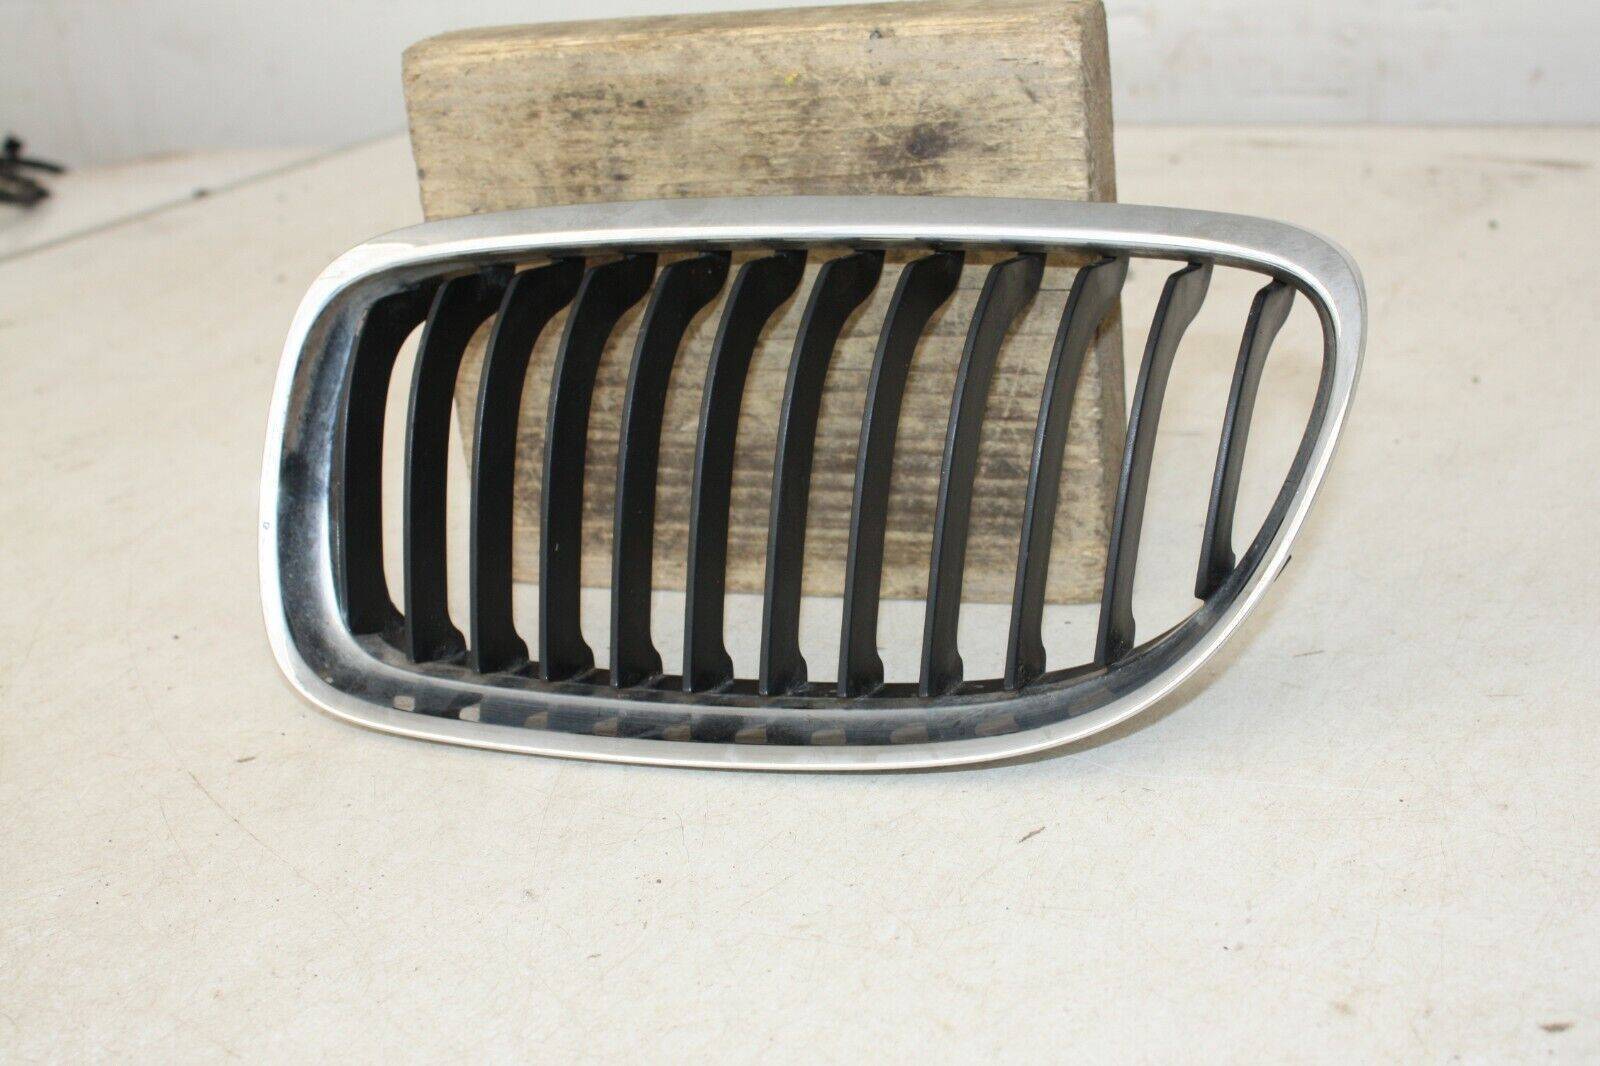 BMW-3-SERIES-FRONT-BUMPER-KIDNEY-GRILL-LEFT-2008-TO-2012-175367532000-3